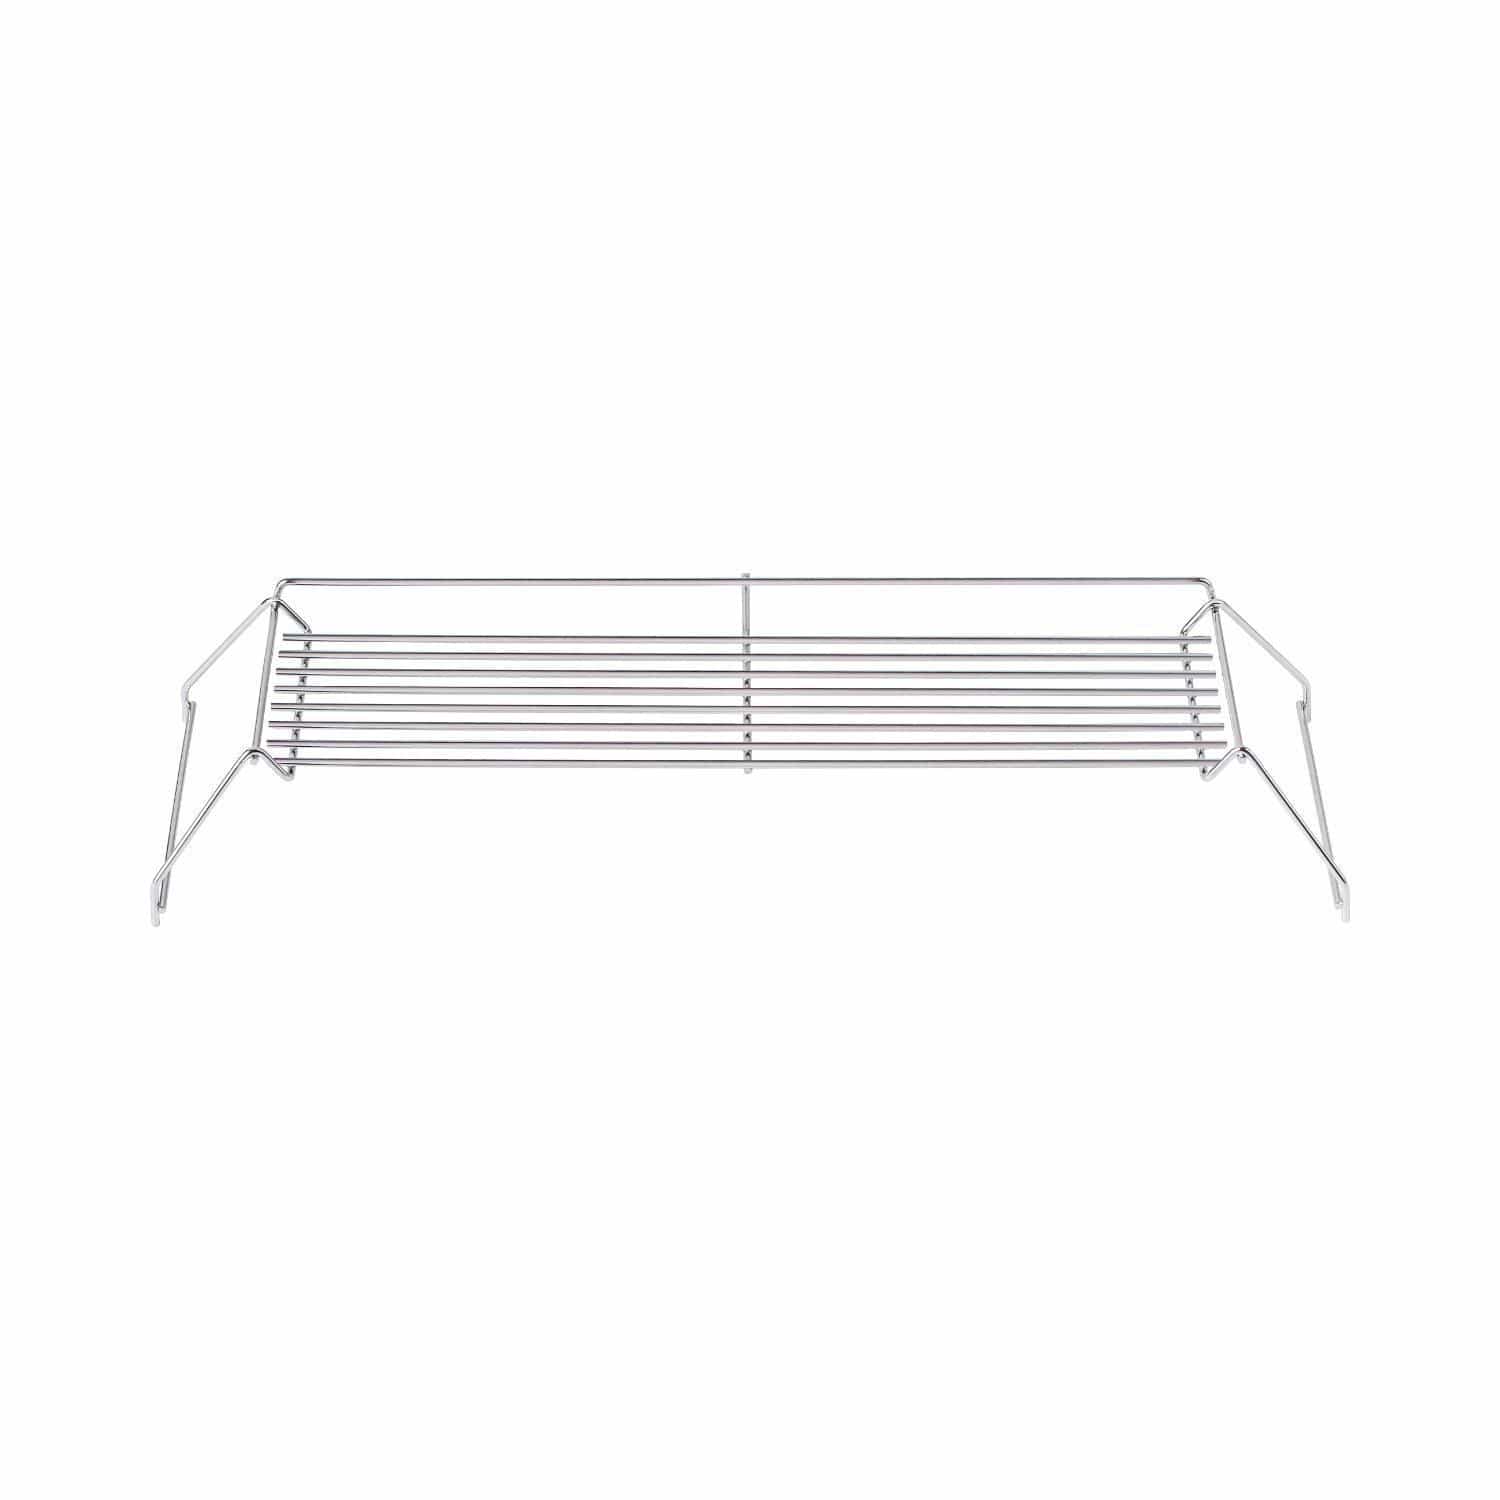 Everdure Grill Accessories Everdure By Heston Blumenthal Warming Rack For FORCE 48-Inch Or FURNACE 52-Inch Propane Grills